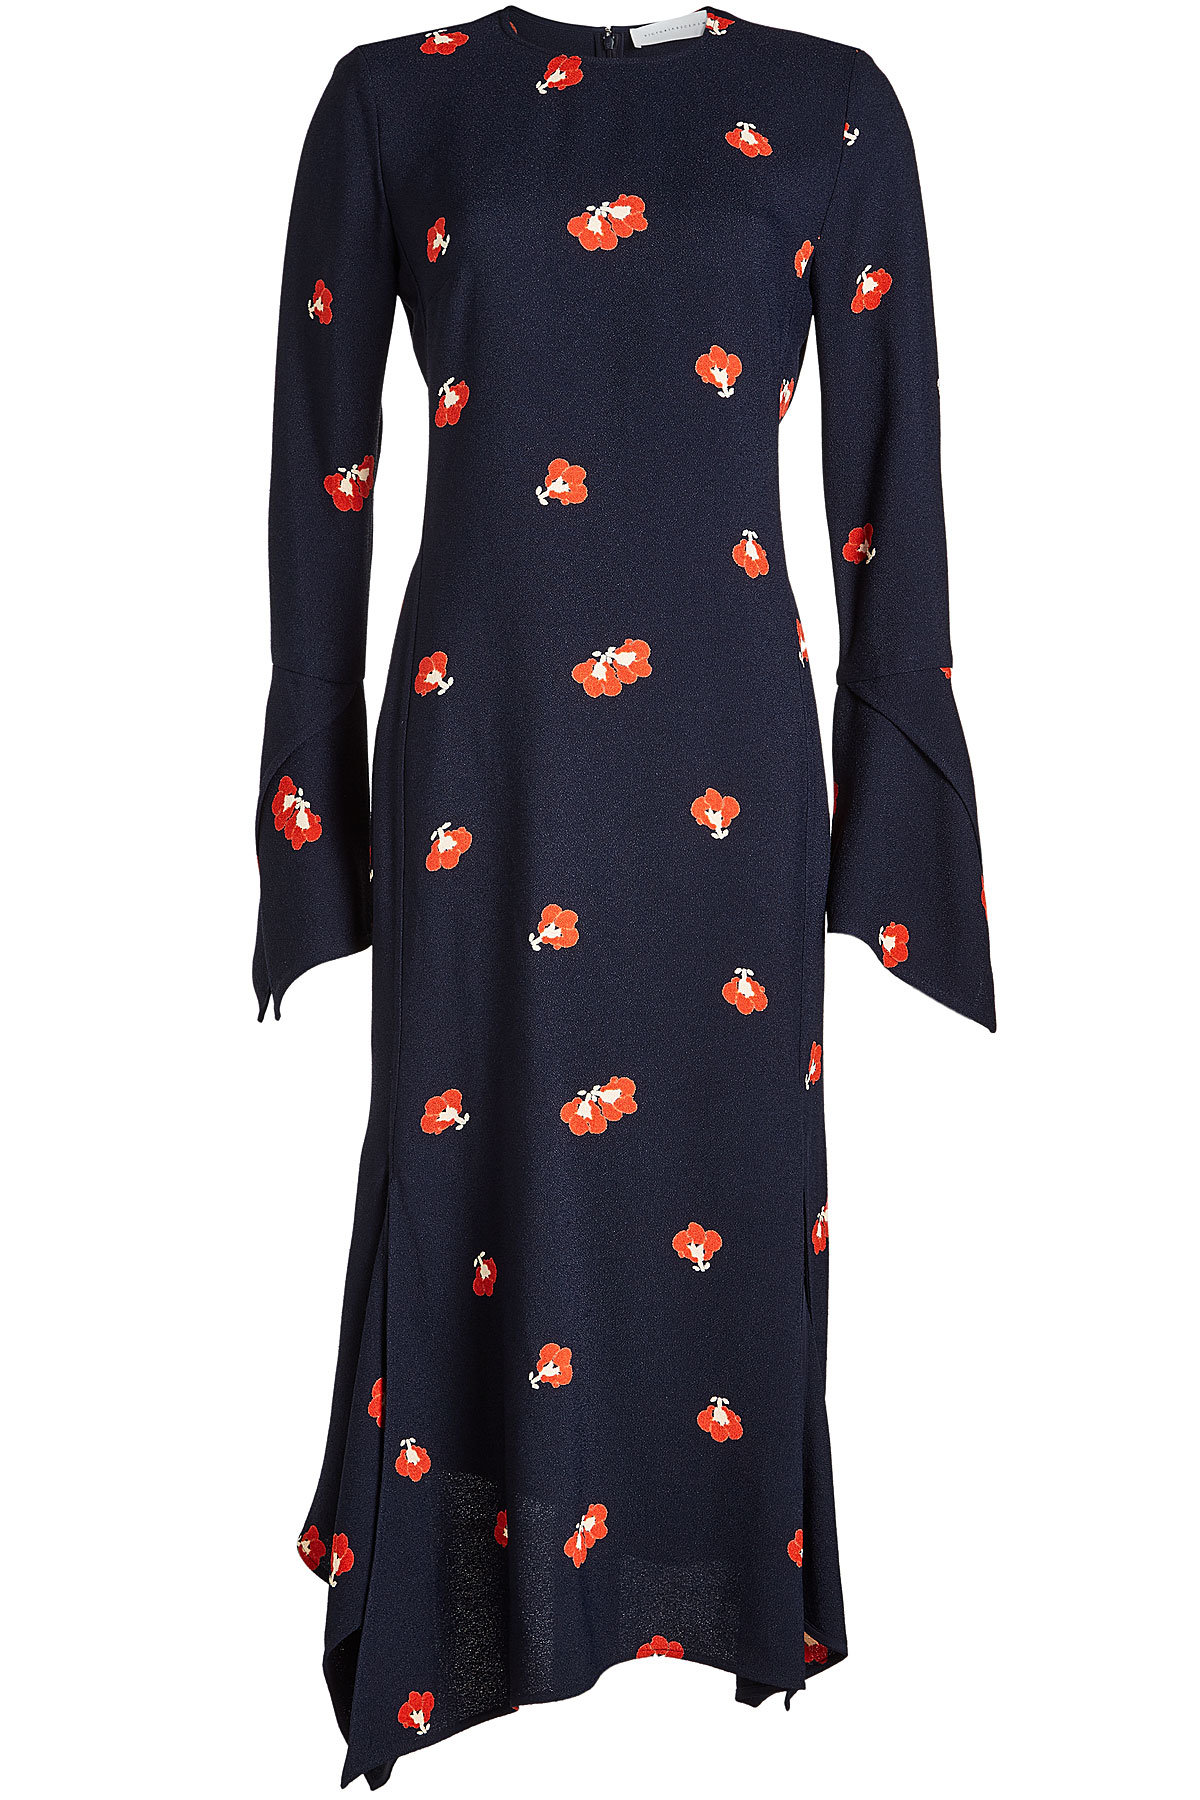 Victoria Beckham - Printed Dress with Flared Sleeves